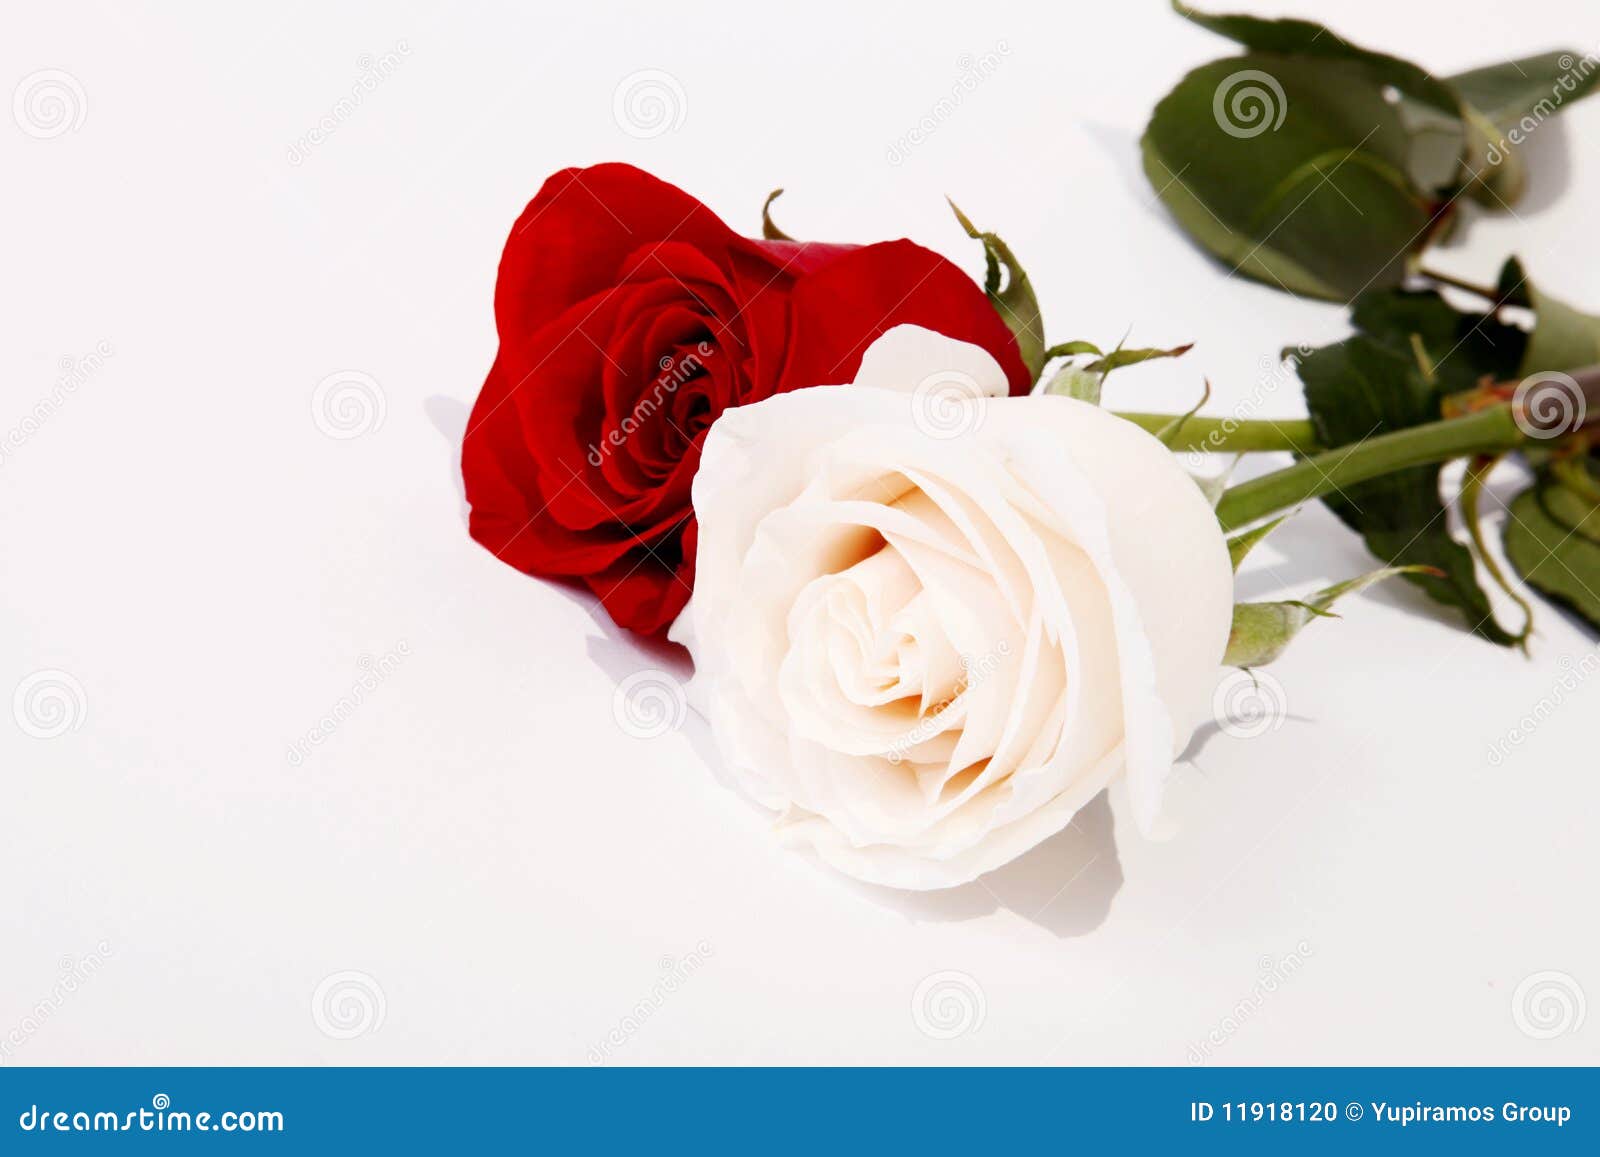 Red And White Roses Stock Photo - Image: 11918120